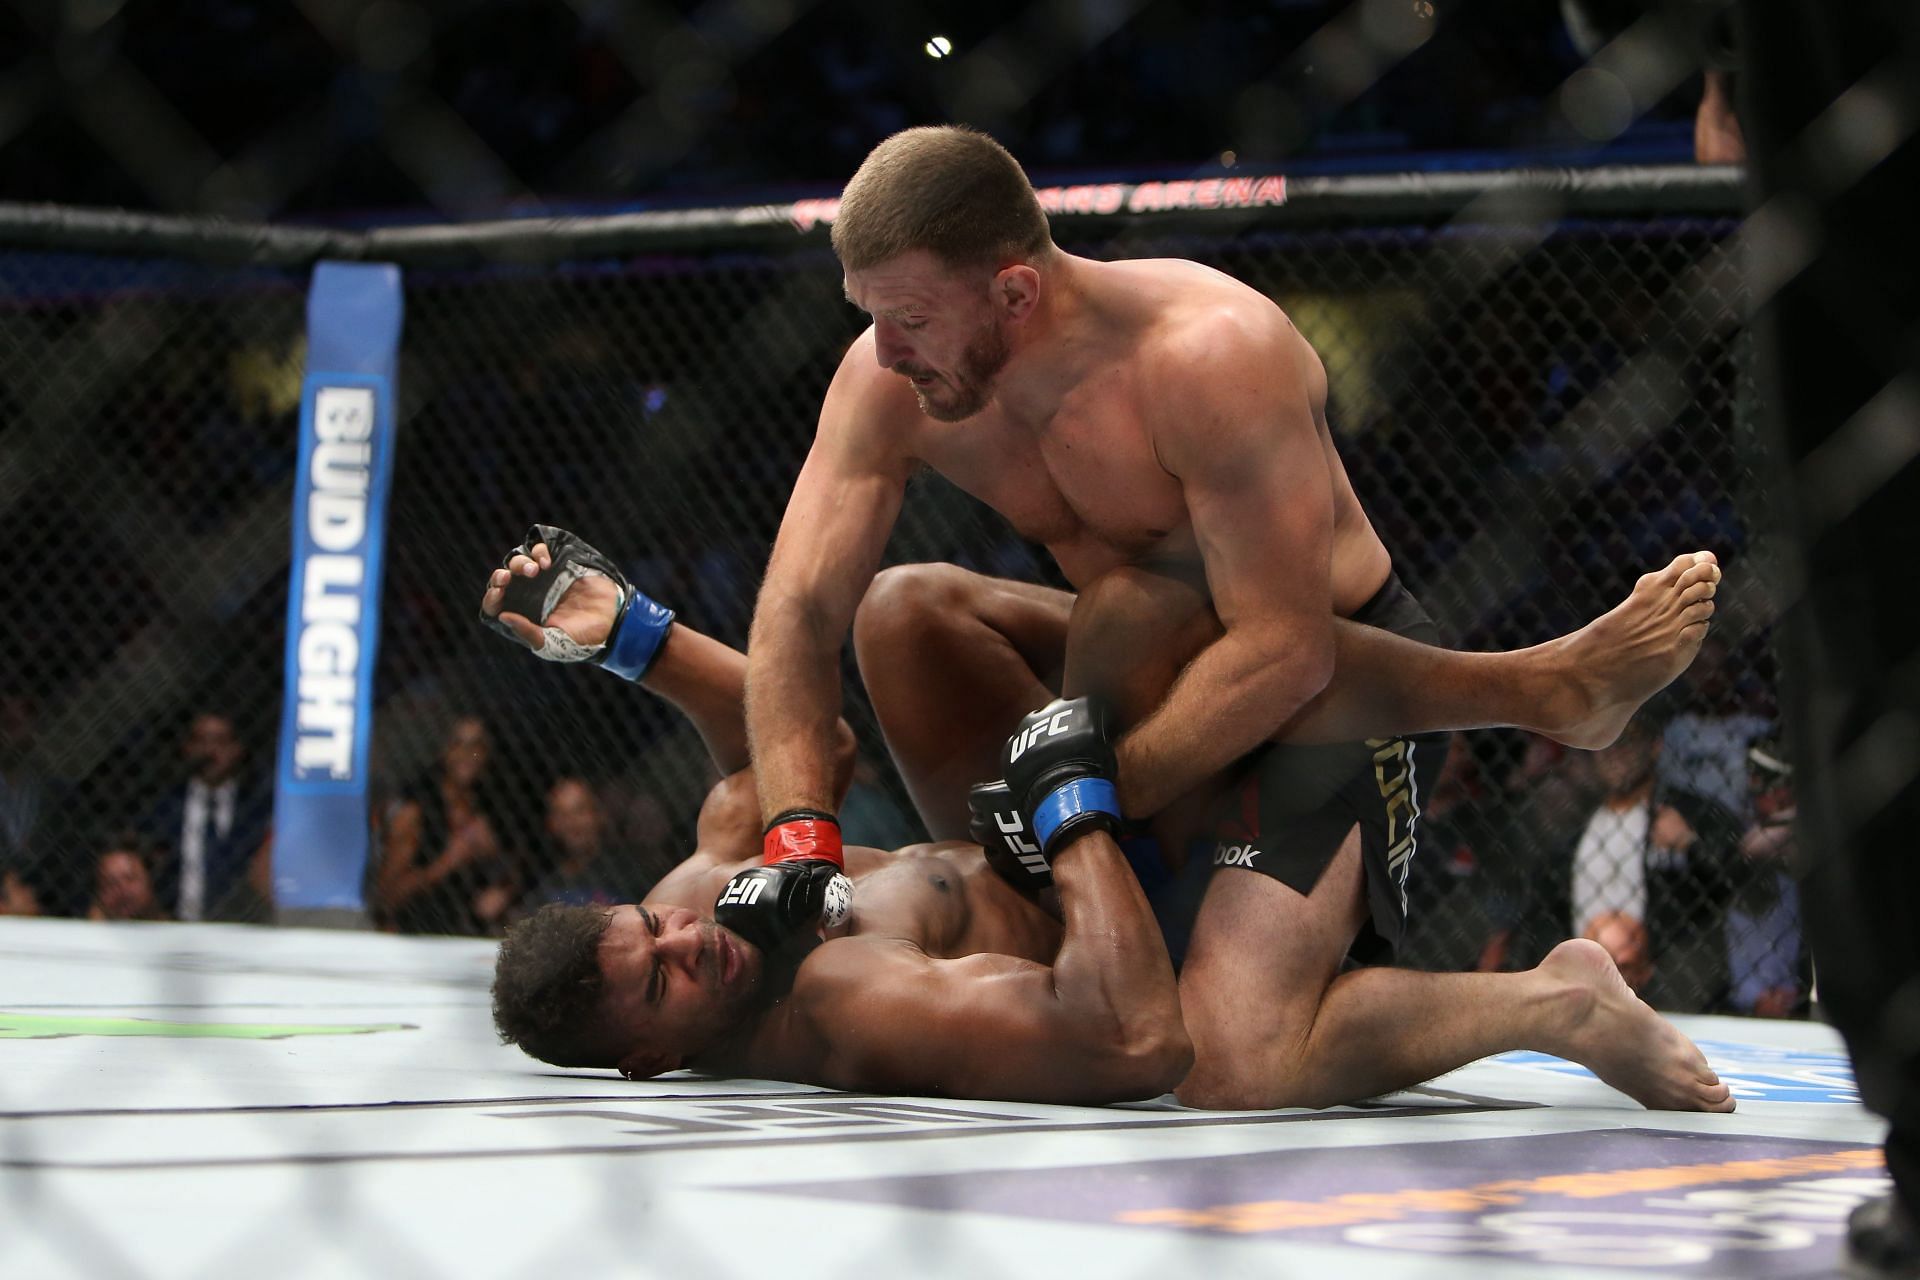 Despite his heavy-handed style and accomplishments, Stipe Miocic&#039;s star didn&#039;t seem to ascend too highly